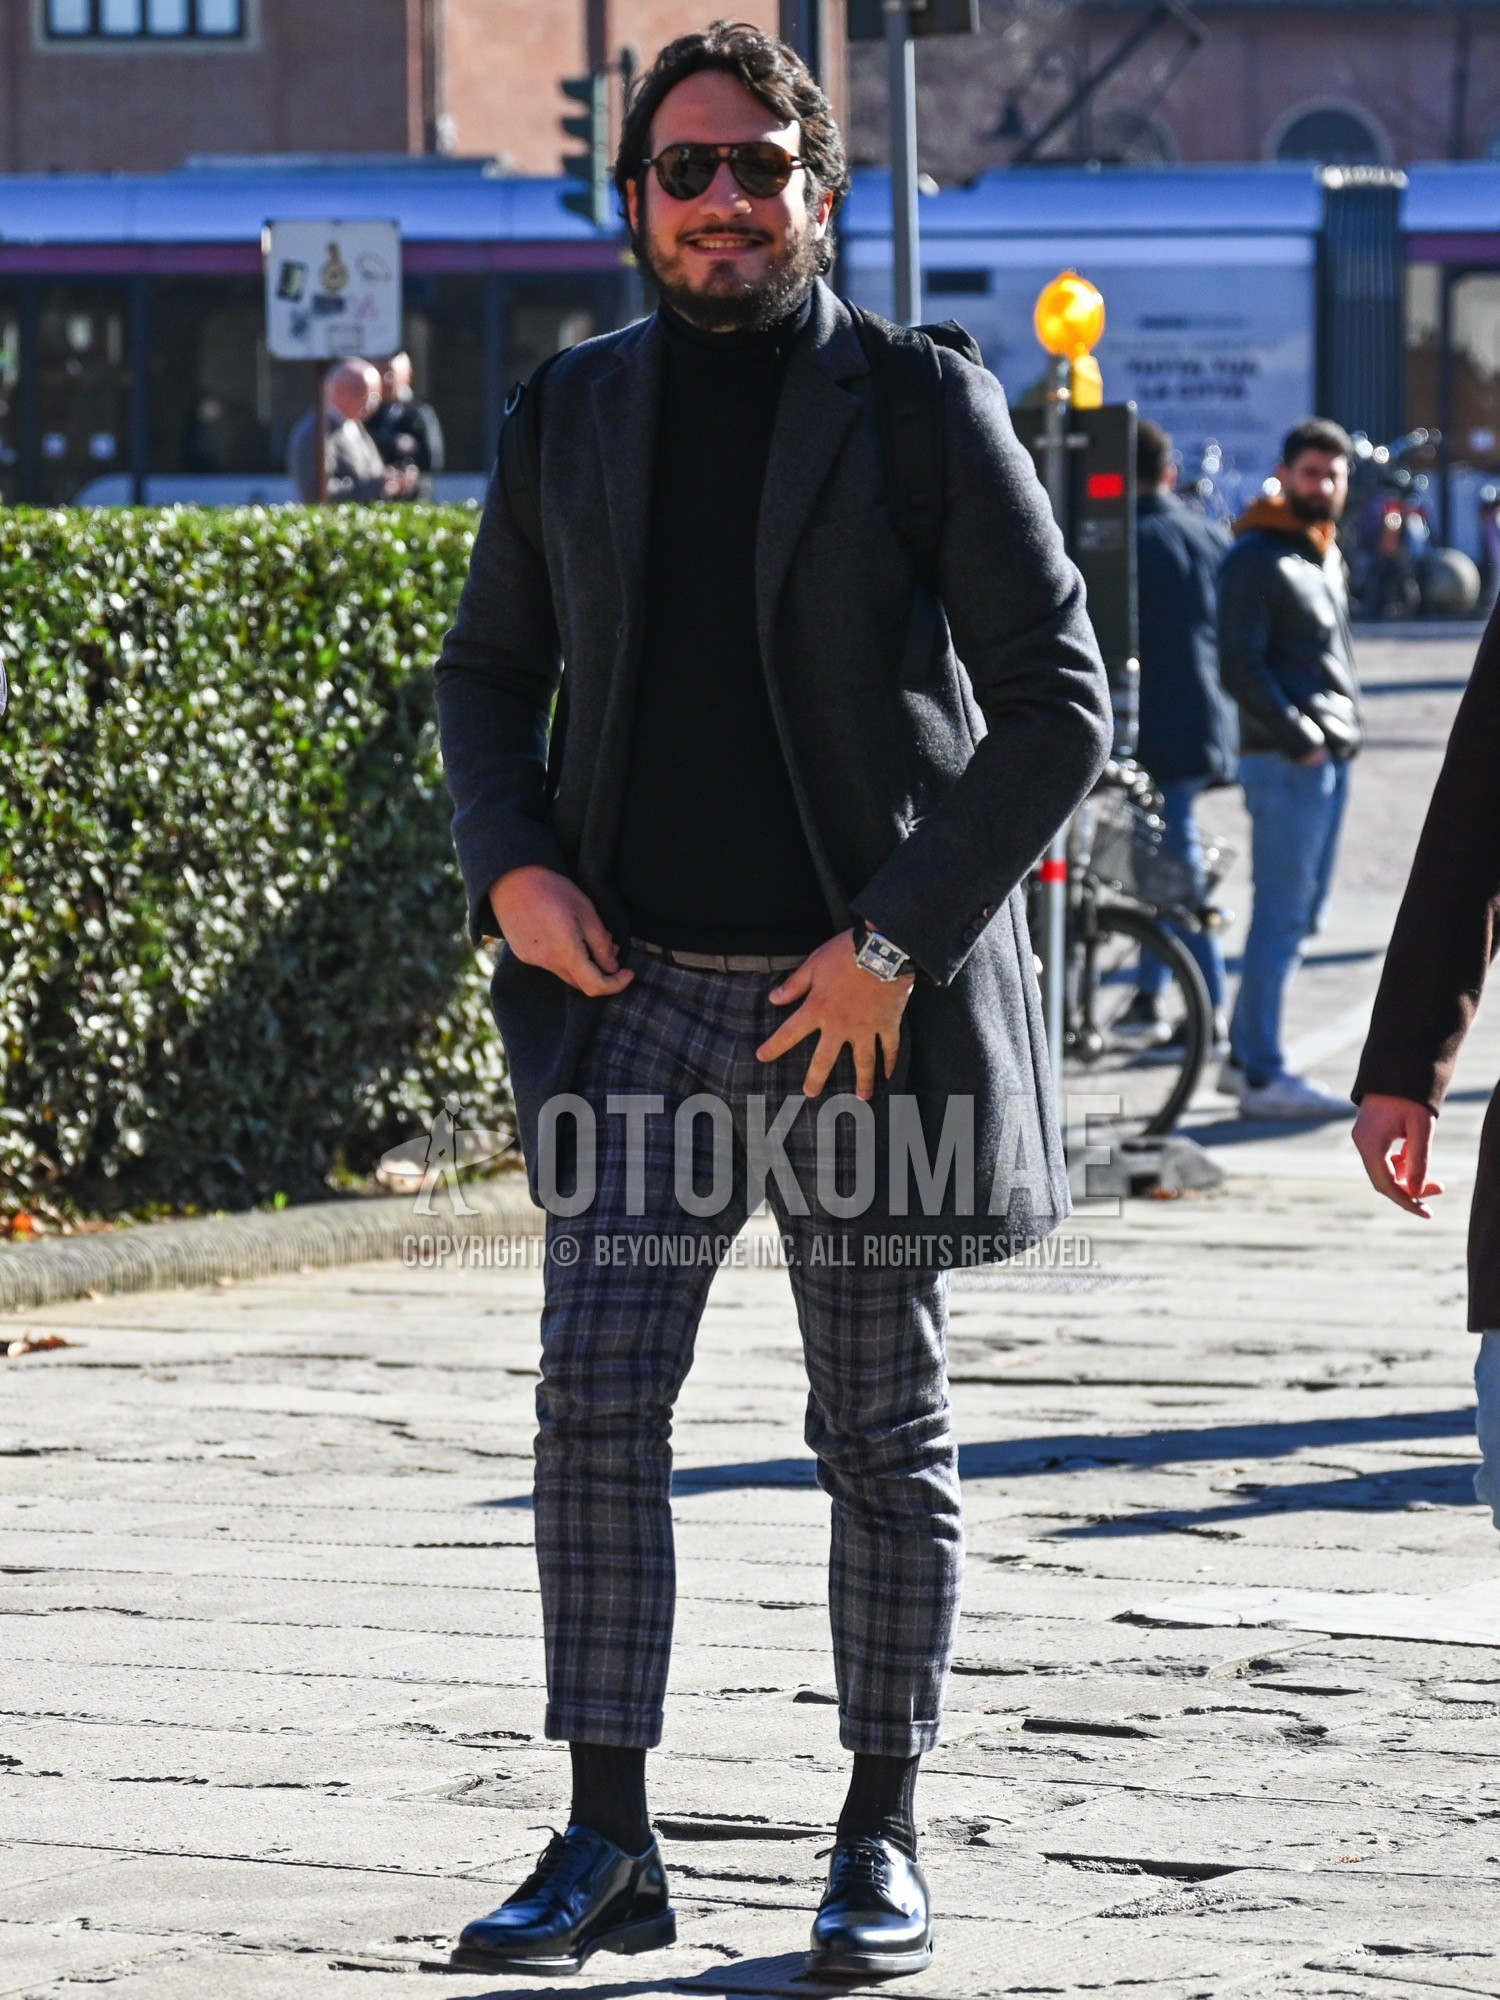 Men's autumn winter outfit with black tortoiseshell sunglasses, dark gray plain chester coat, black plain sweater, gray plain leather belt, gray check ankle pants, black plain socks, black plain toe leather shoes.